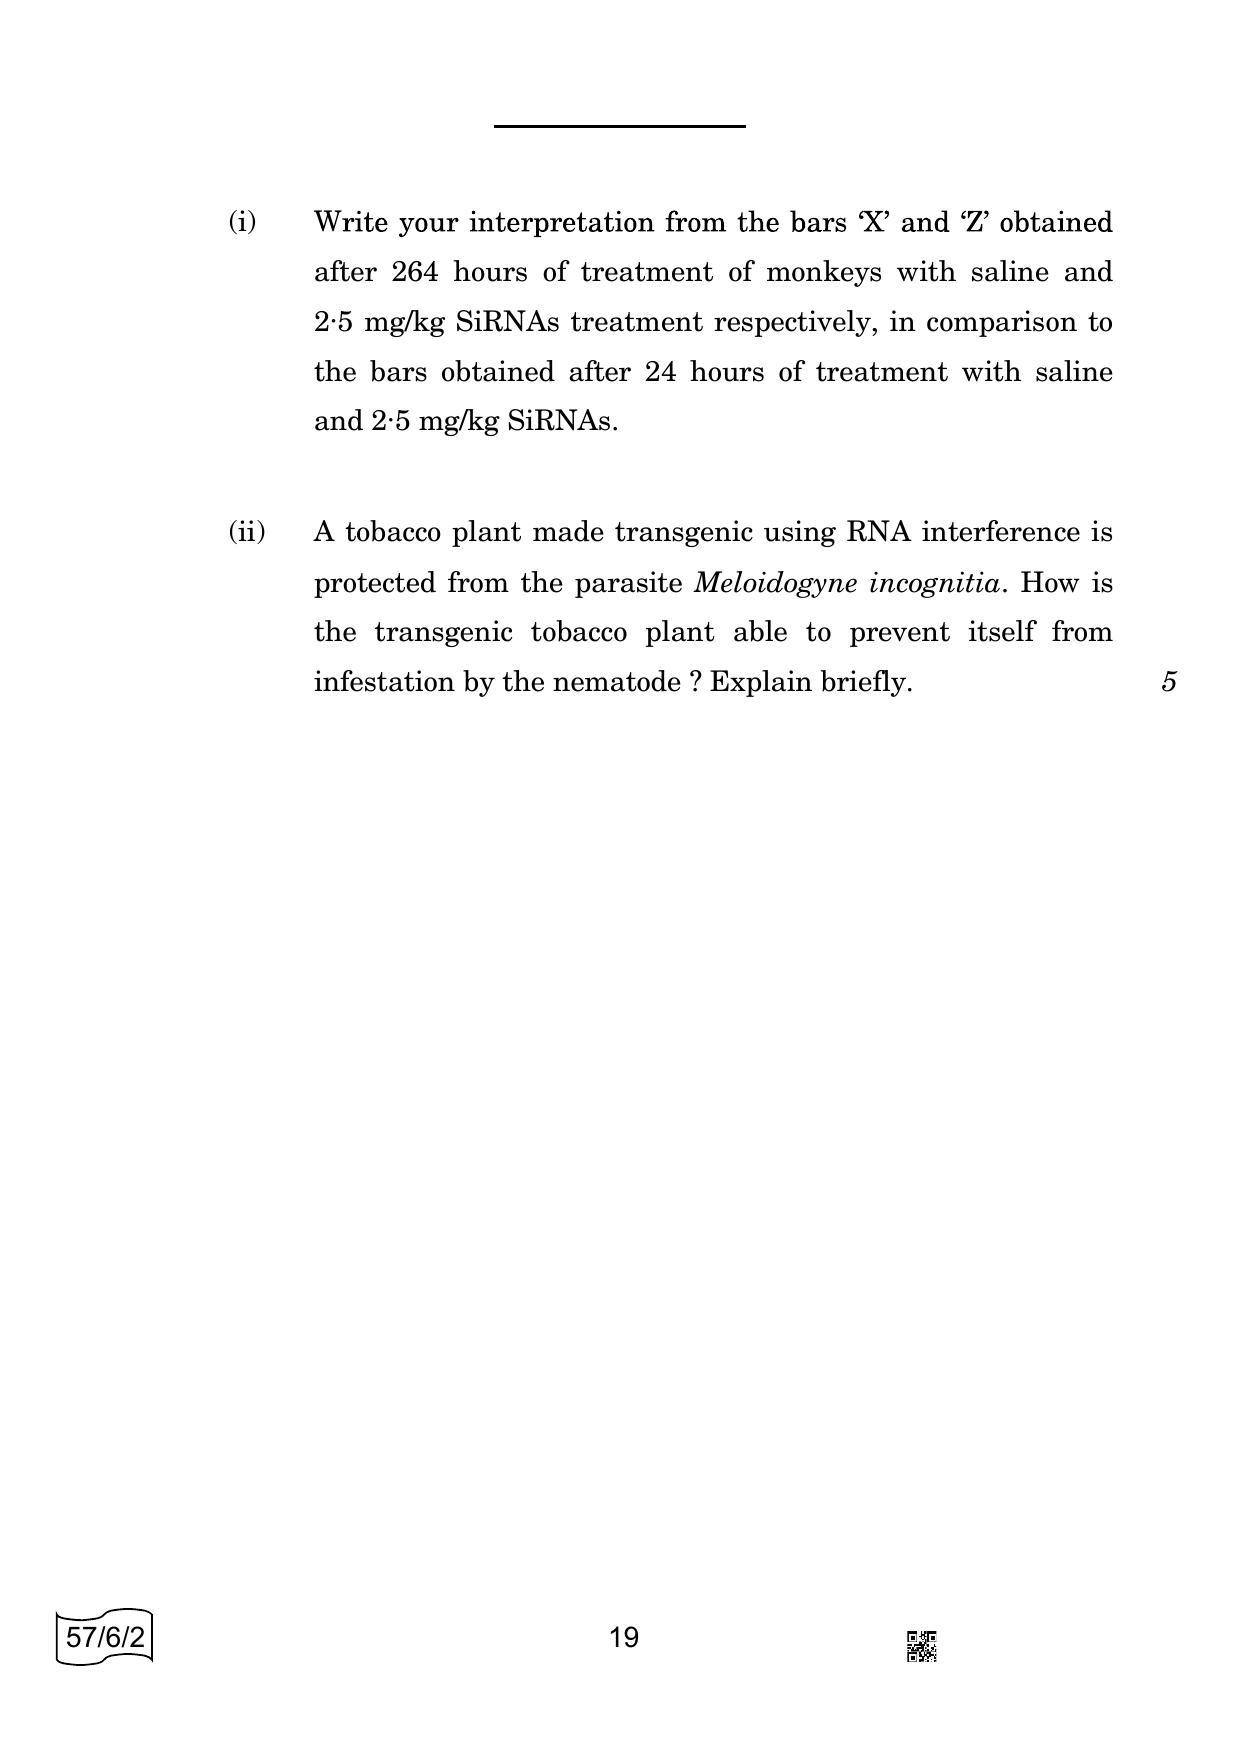 CBSE Class 12 57-6-2 BIOLOGY 2022 Compartment Question Paper - Page 19